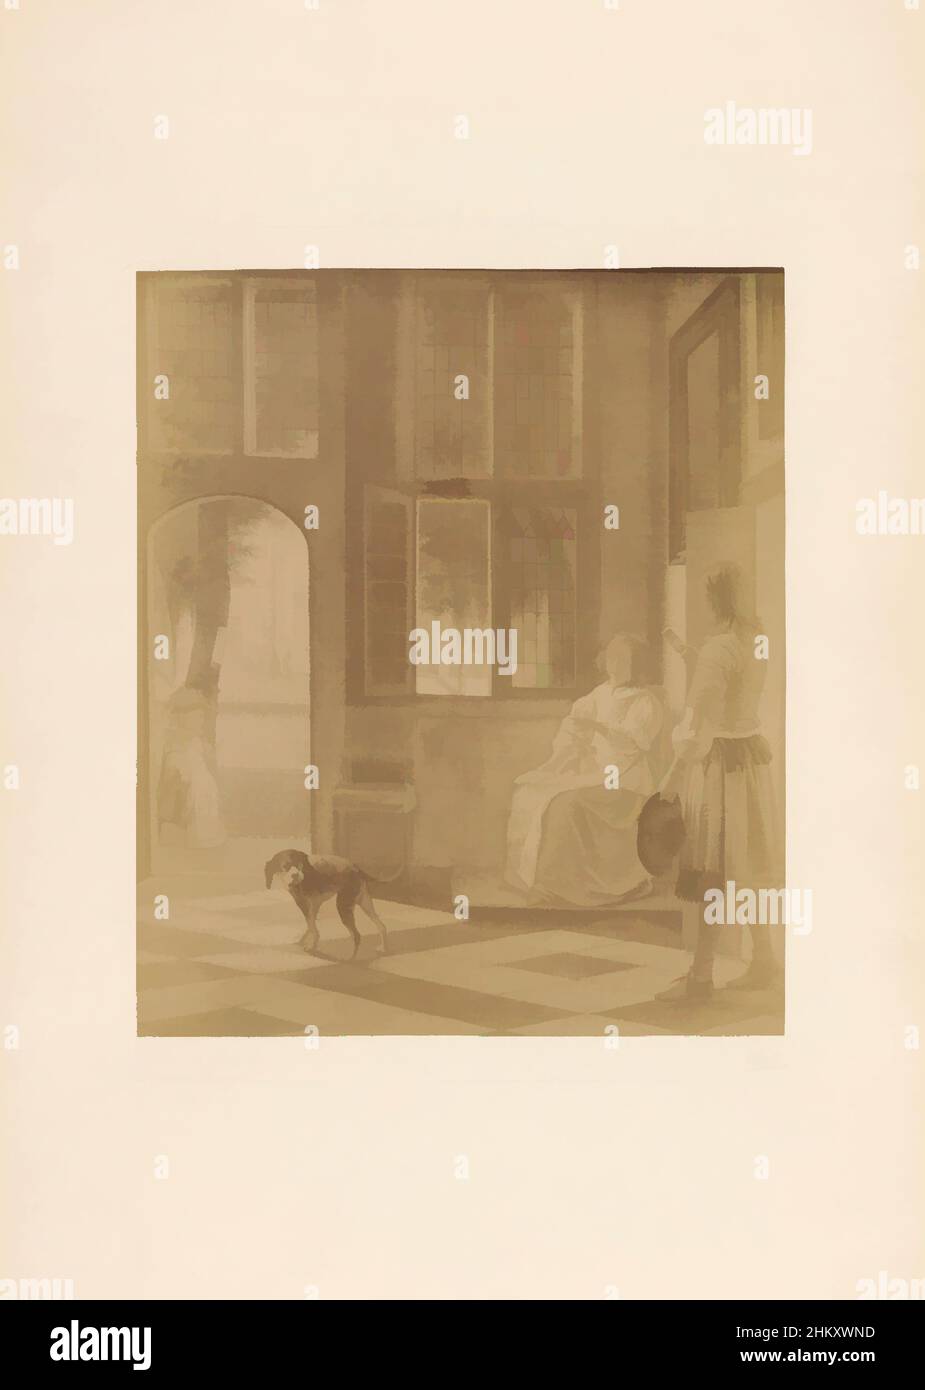 Art inspired by Photoreproduction of a painting by Pieter de Hooch, titled 'Presenting a letter in a front house', Pieter de Hooch, Netherlands, c. 1875 - c. 1900, cardboard, albumen print, height 240 mm × width 204 mm, Classic works modernized by Artotop with a splash of modernity. Shapes, color and value, eye-catching visual impact on art. Emotions through freedom of artworks in a contemporary way. A timeless message pursuing a wildly creative new direction. Artists turning to the digital medium and creating the Artotop NFT Stock Photo